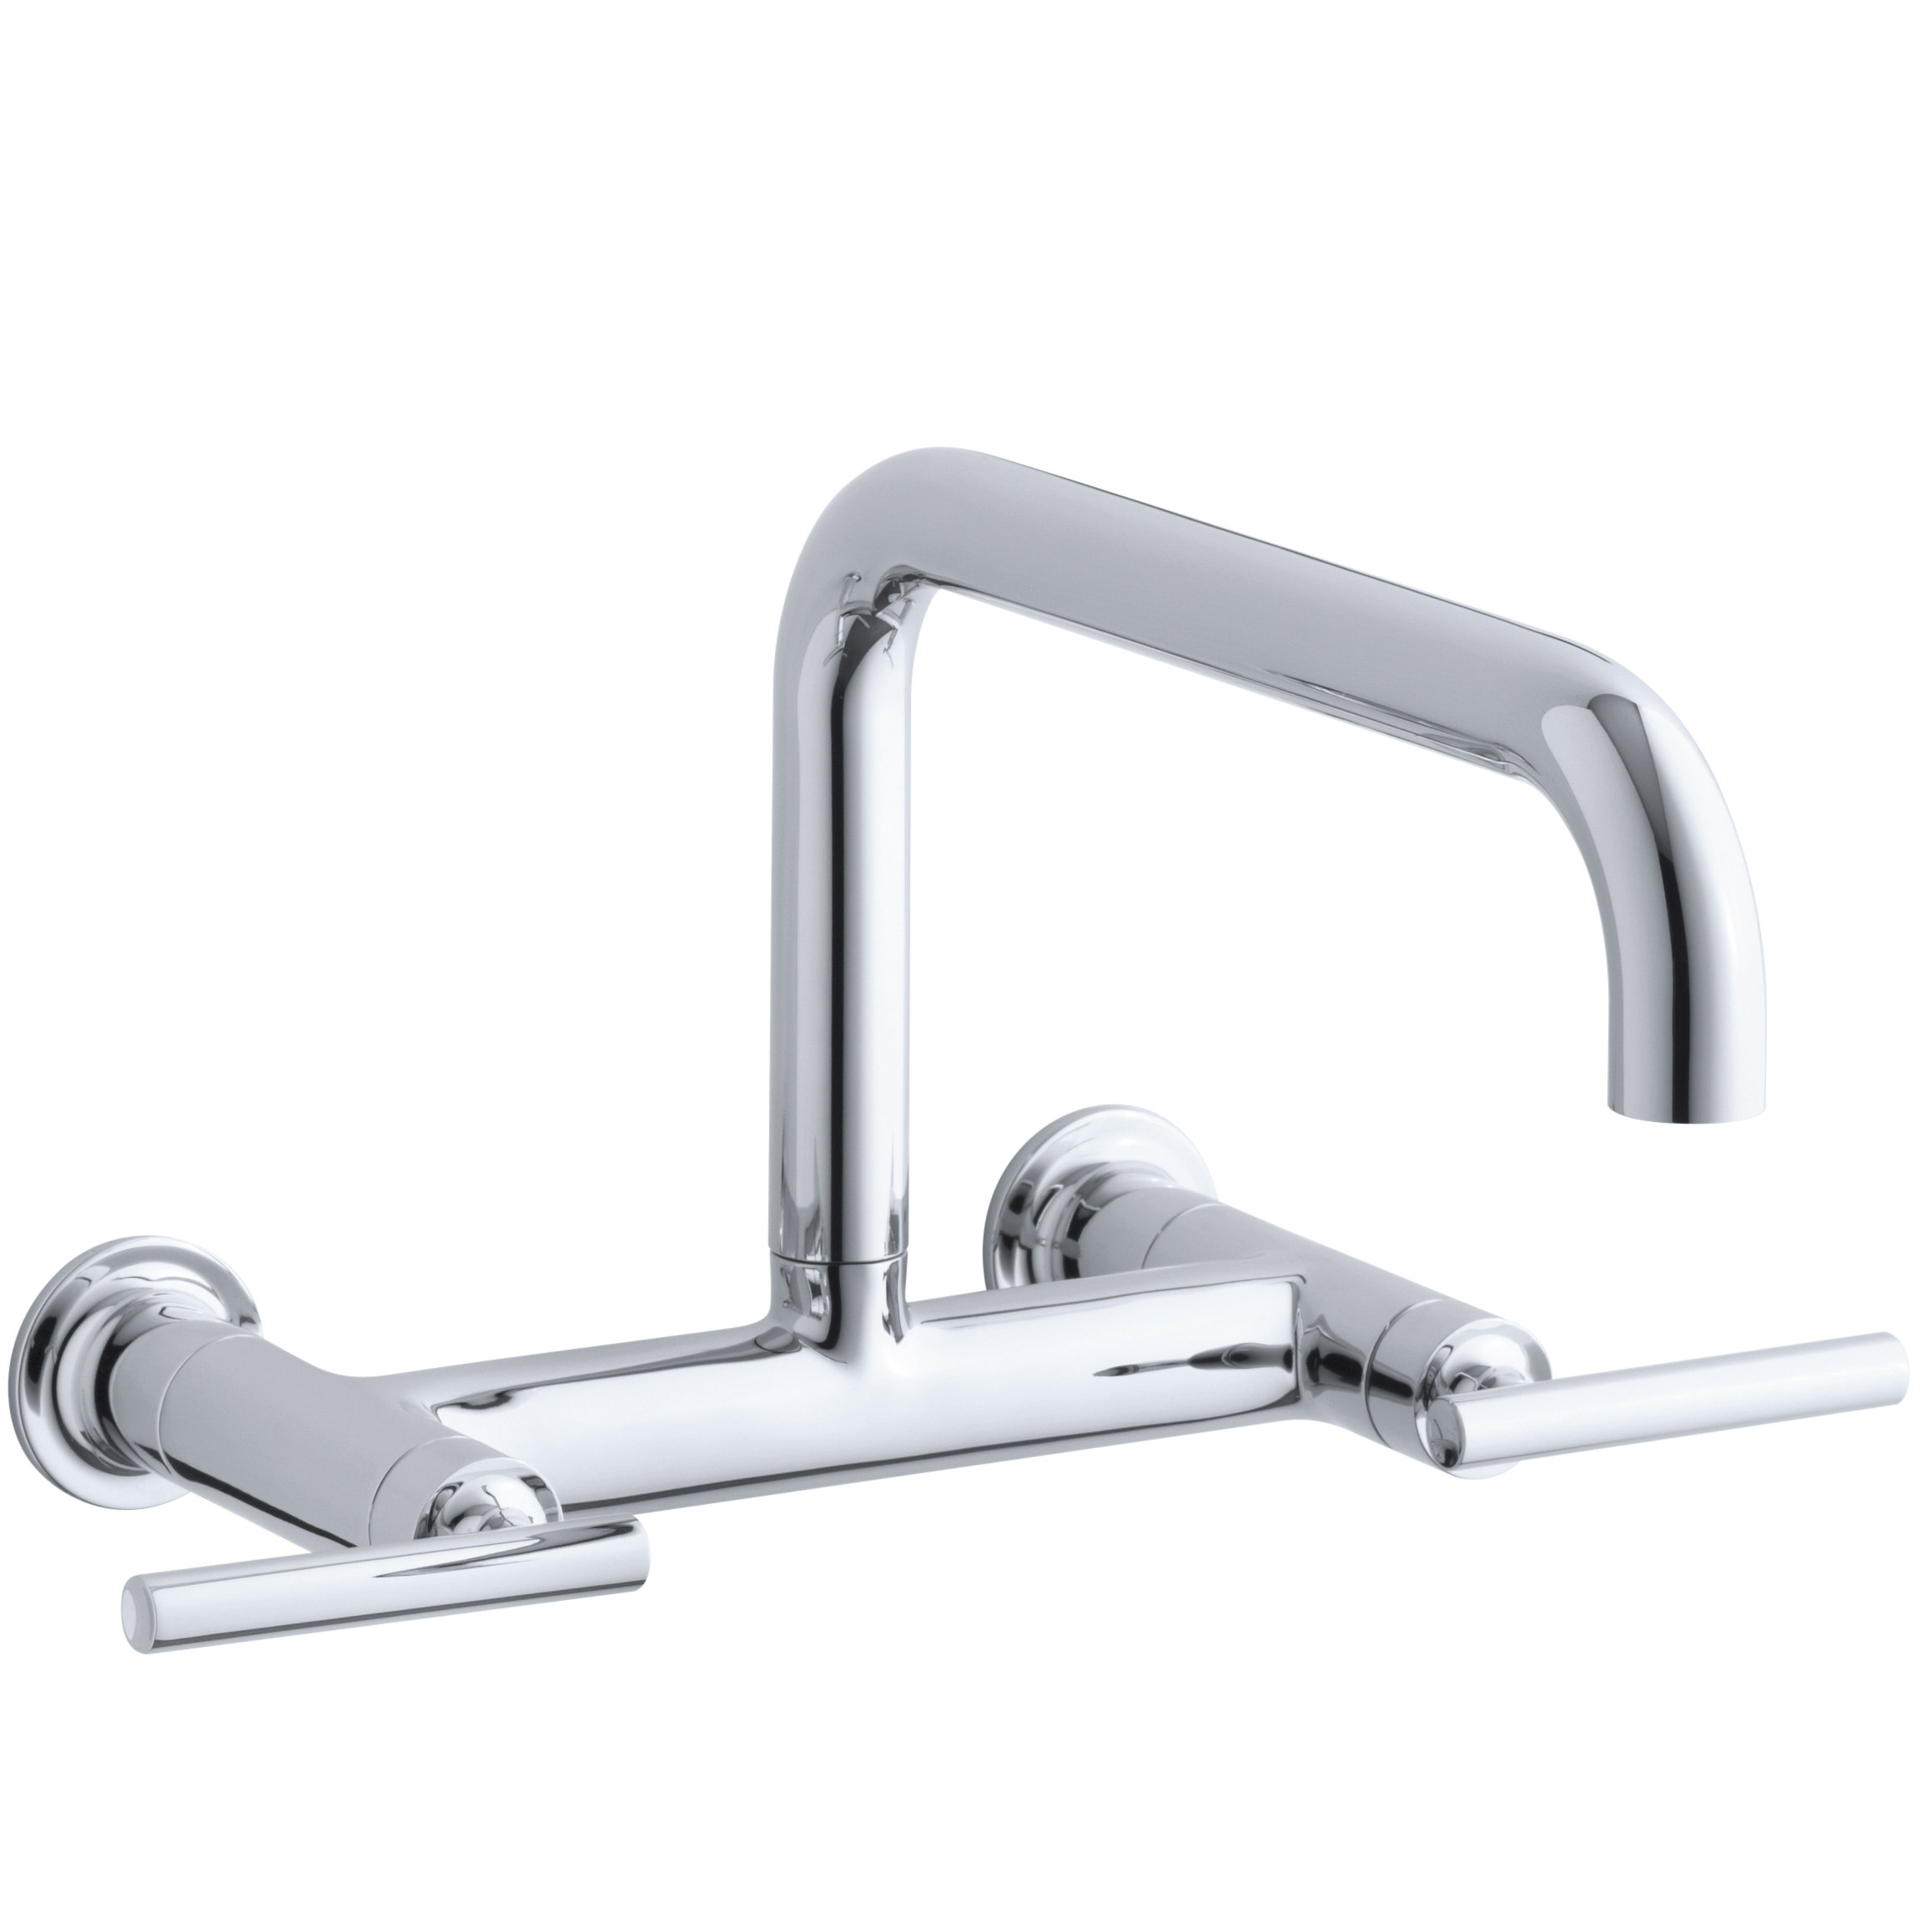 Purist Two Hole Wall Mount Bridge Kitchen Sink Faucet With 13 7 8 Spout